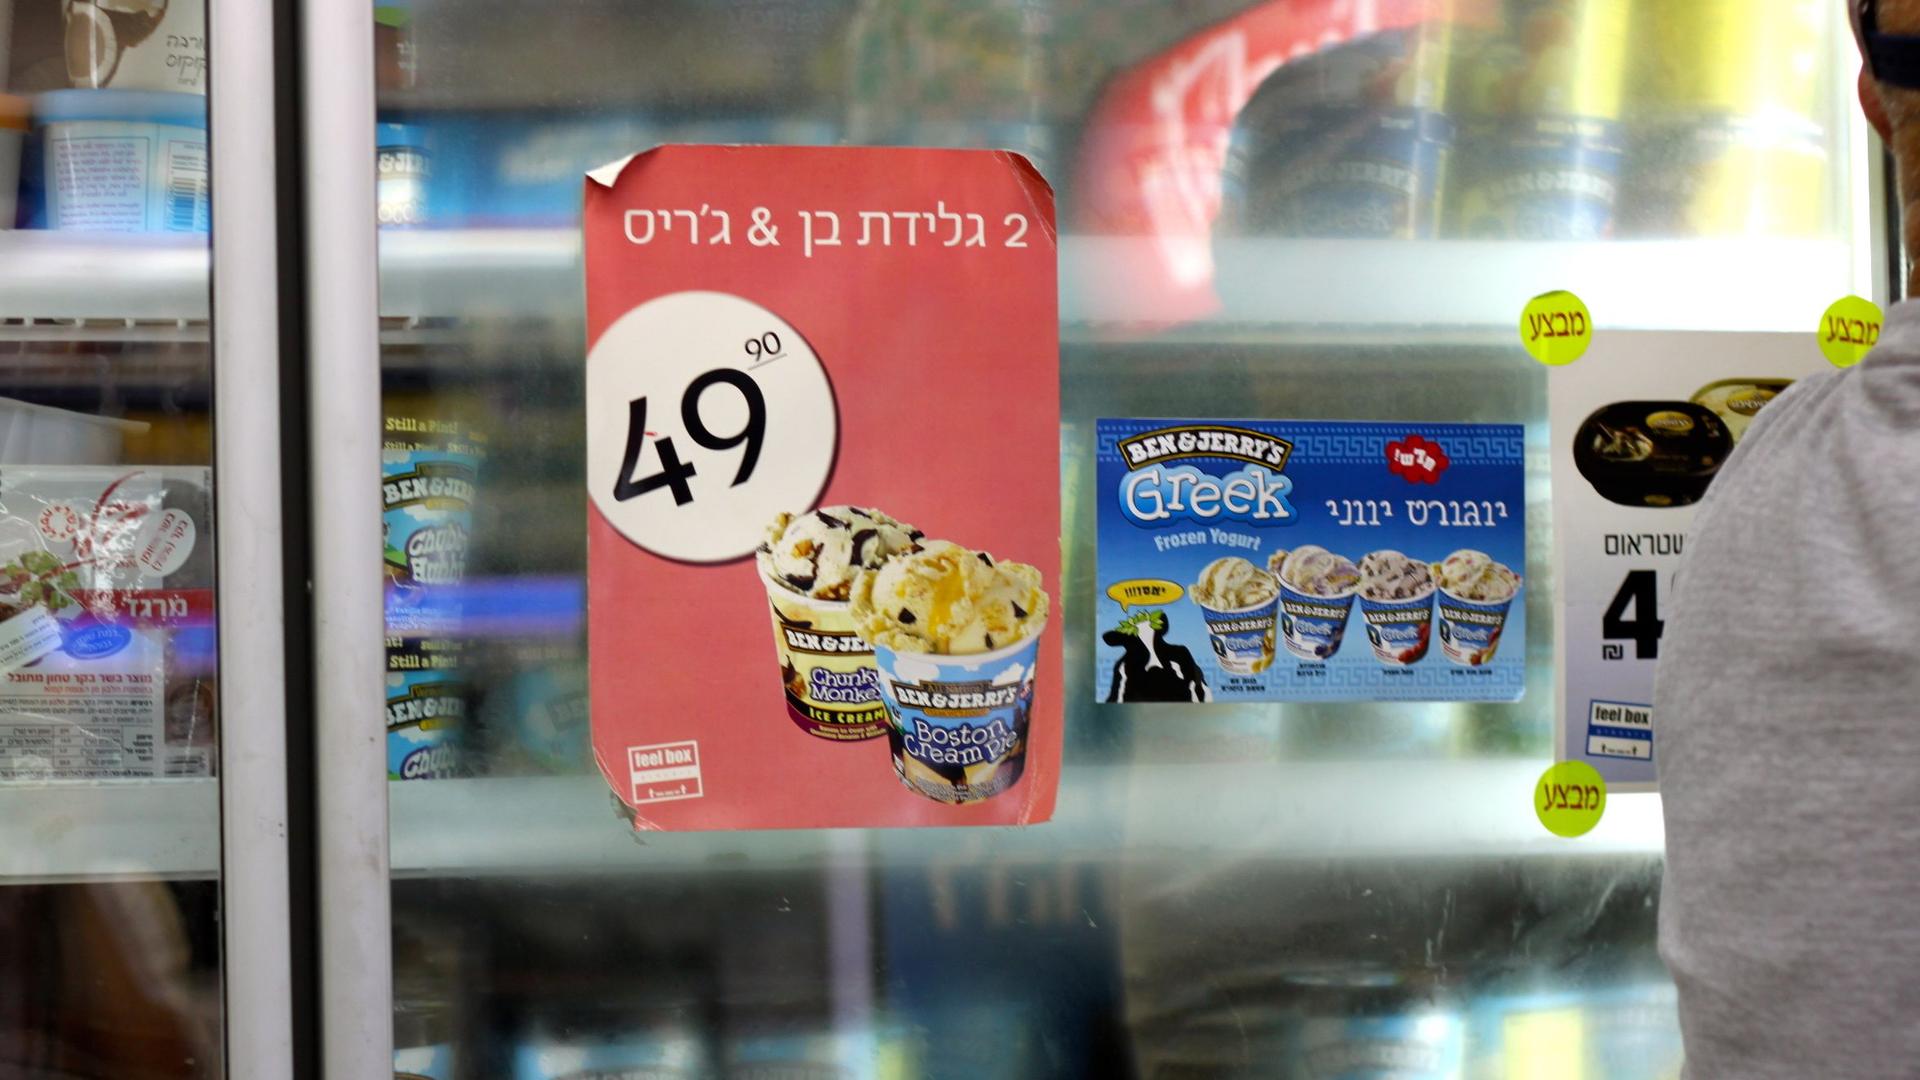 Ben and Jerry's ice cream in Israel is labeled "glida," the Aramaic word for frost. In modern Hebrew, it means ice cream.